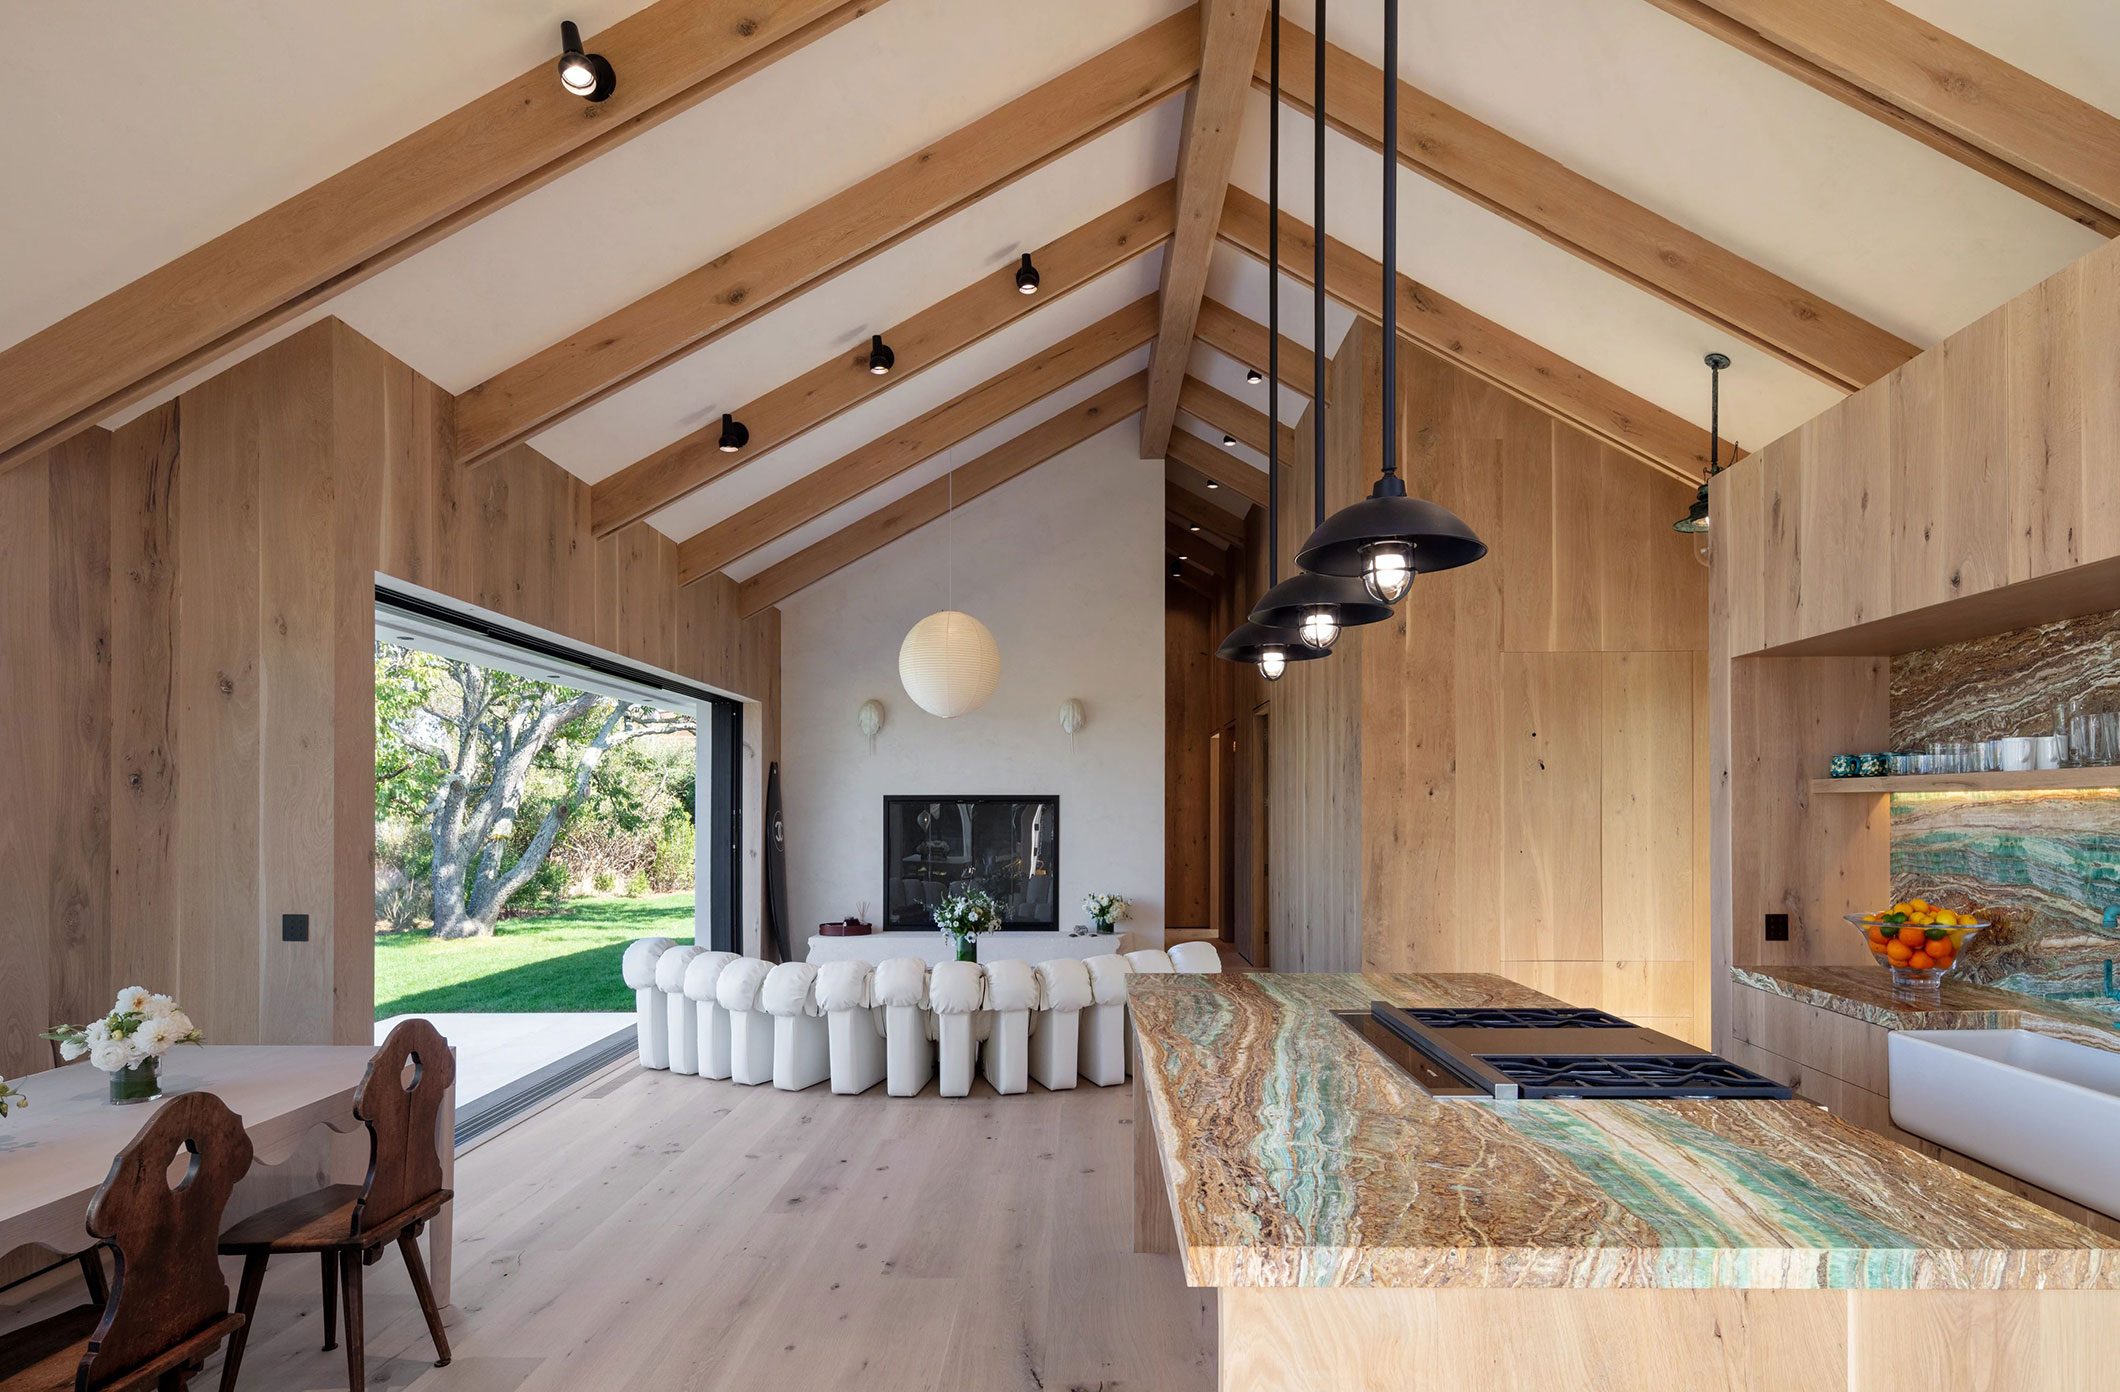 A barn house showing ambient lighting layer through natural daylight and task lighting layer with pendants